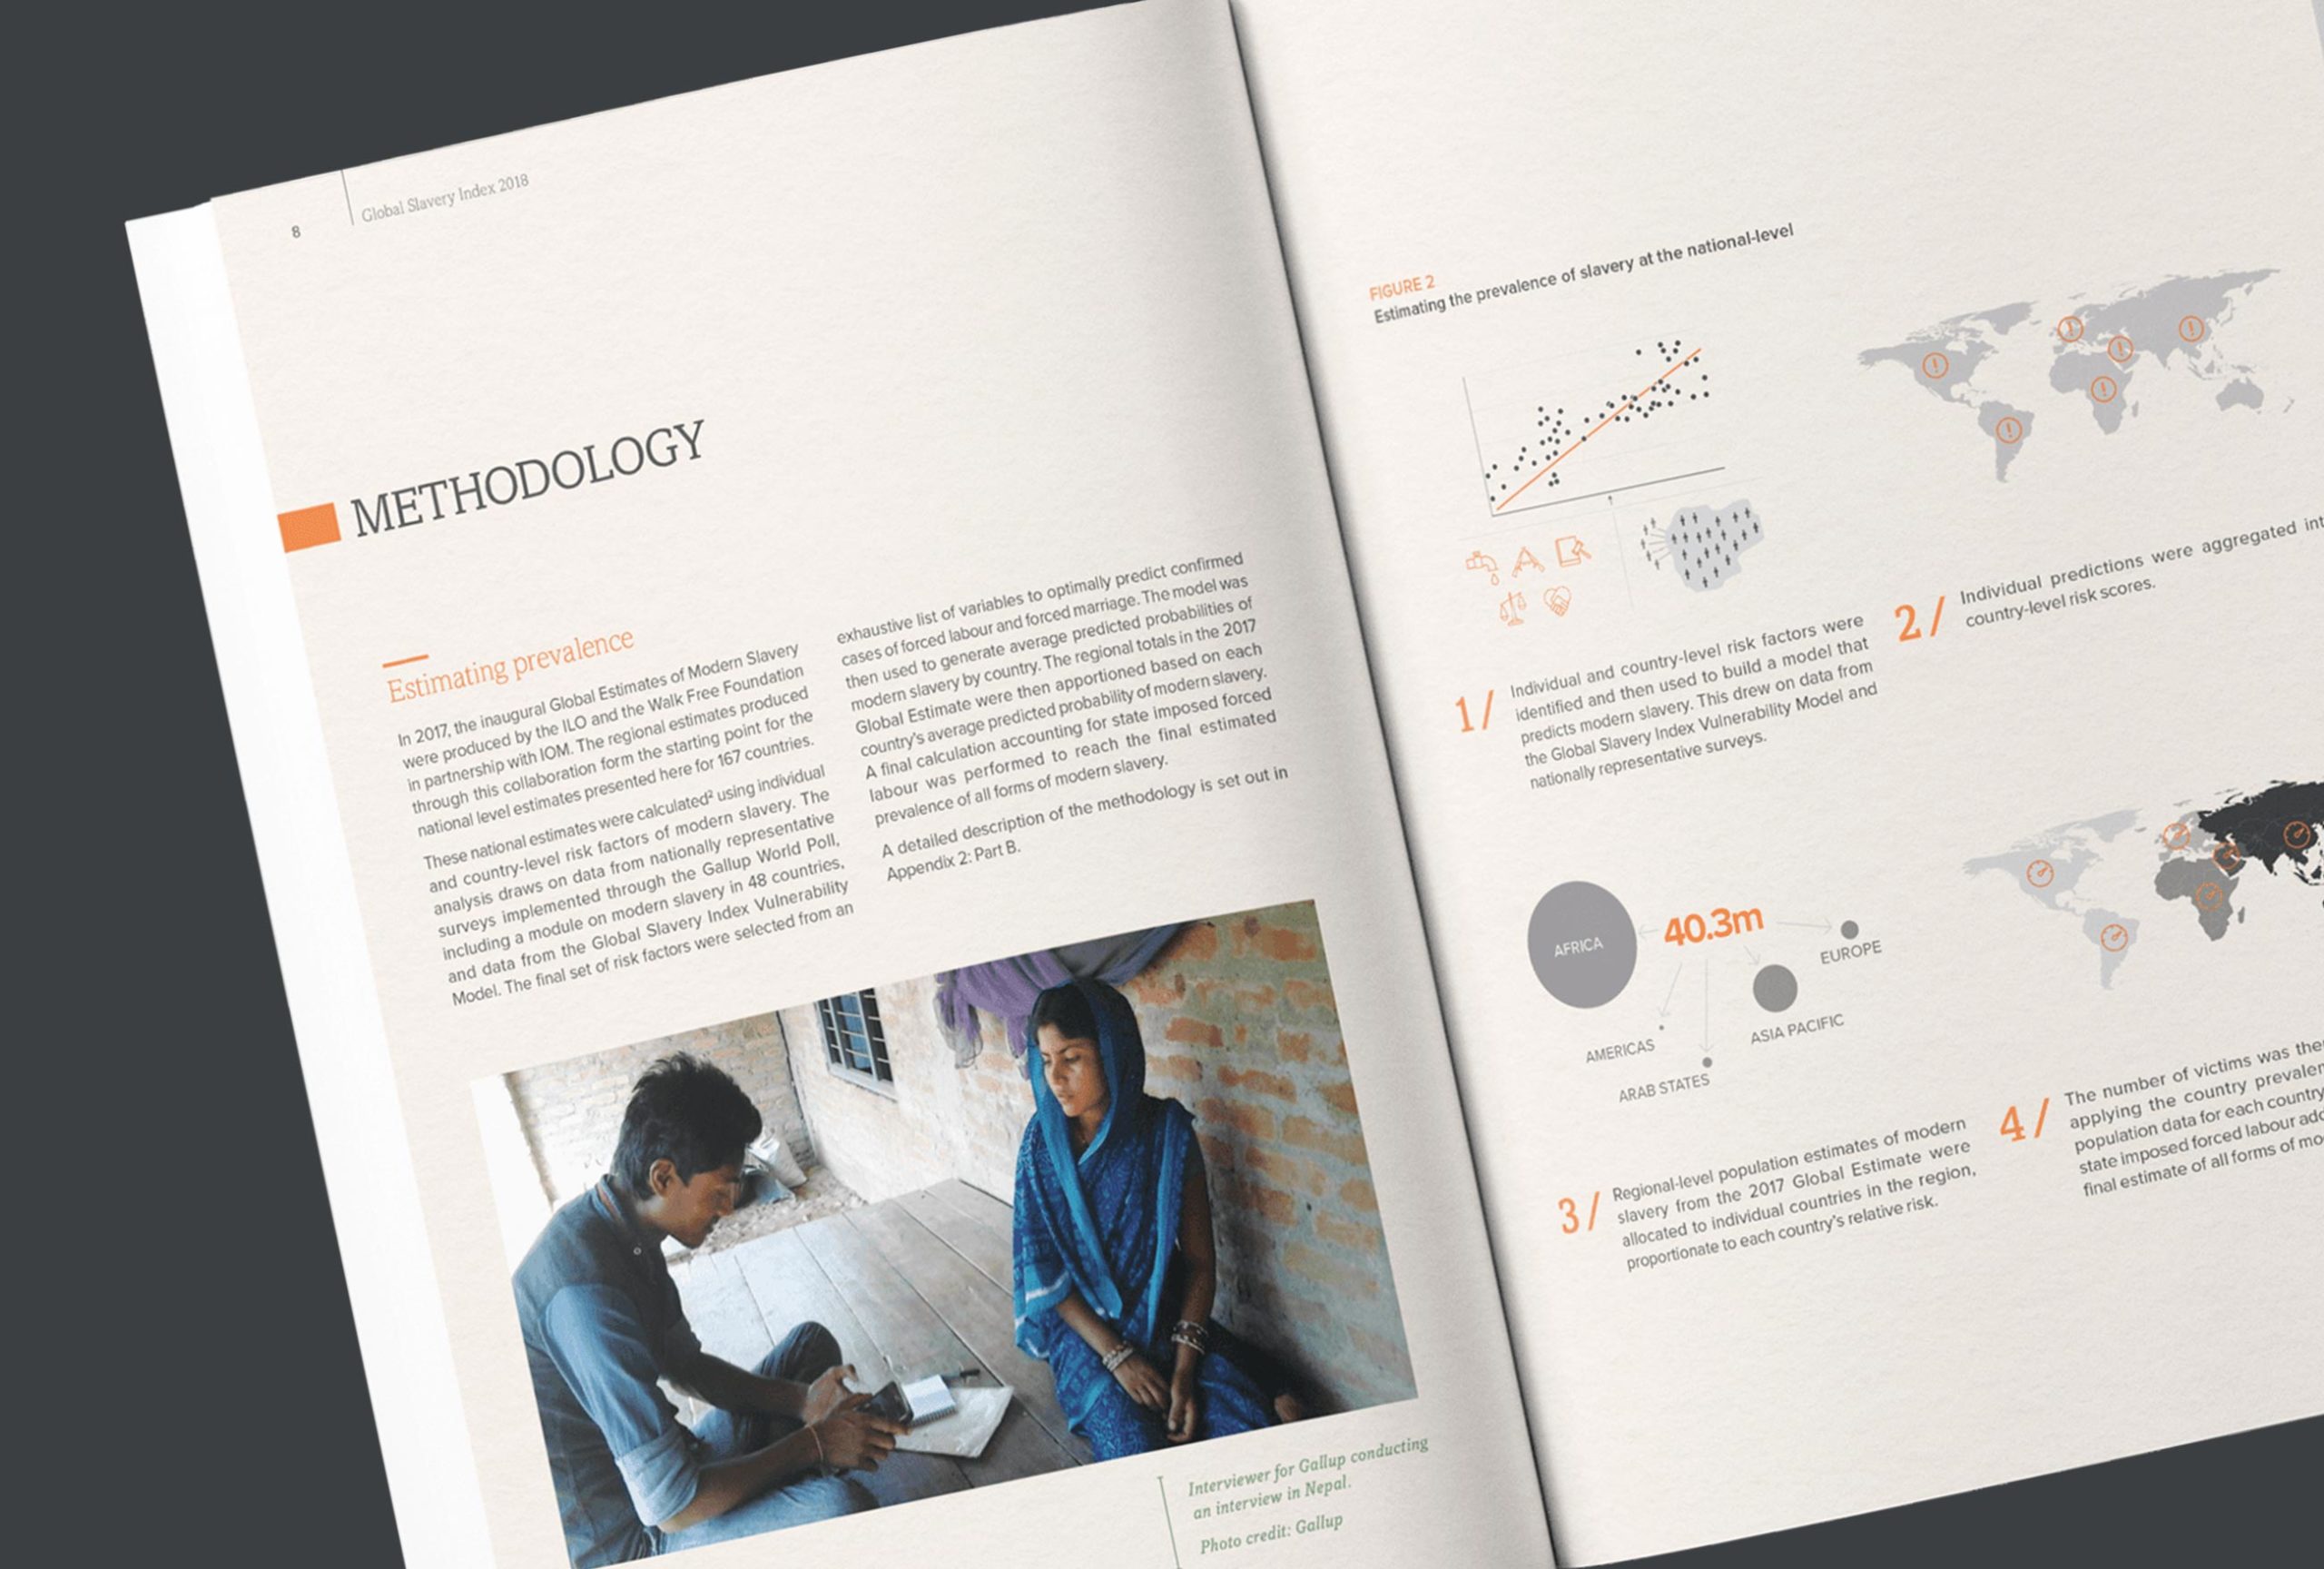 A spread from The Global Slavery Index book, showing their methodology.